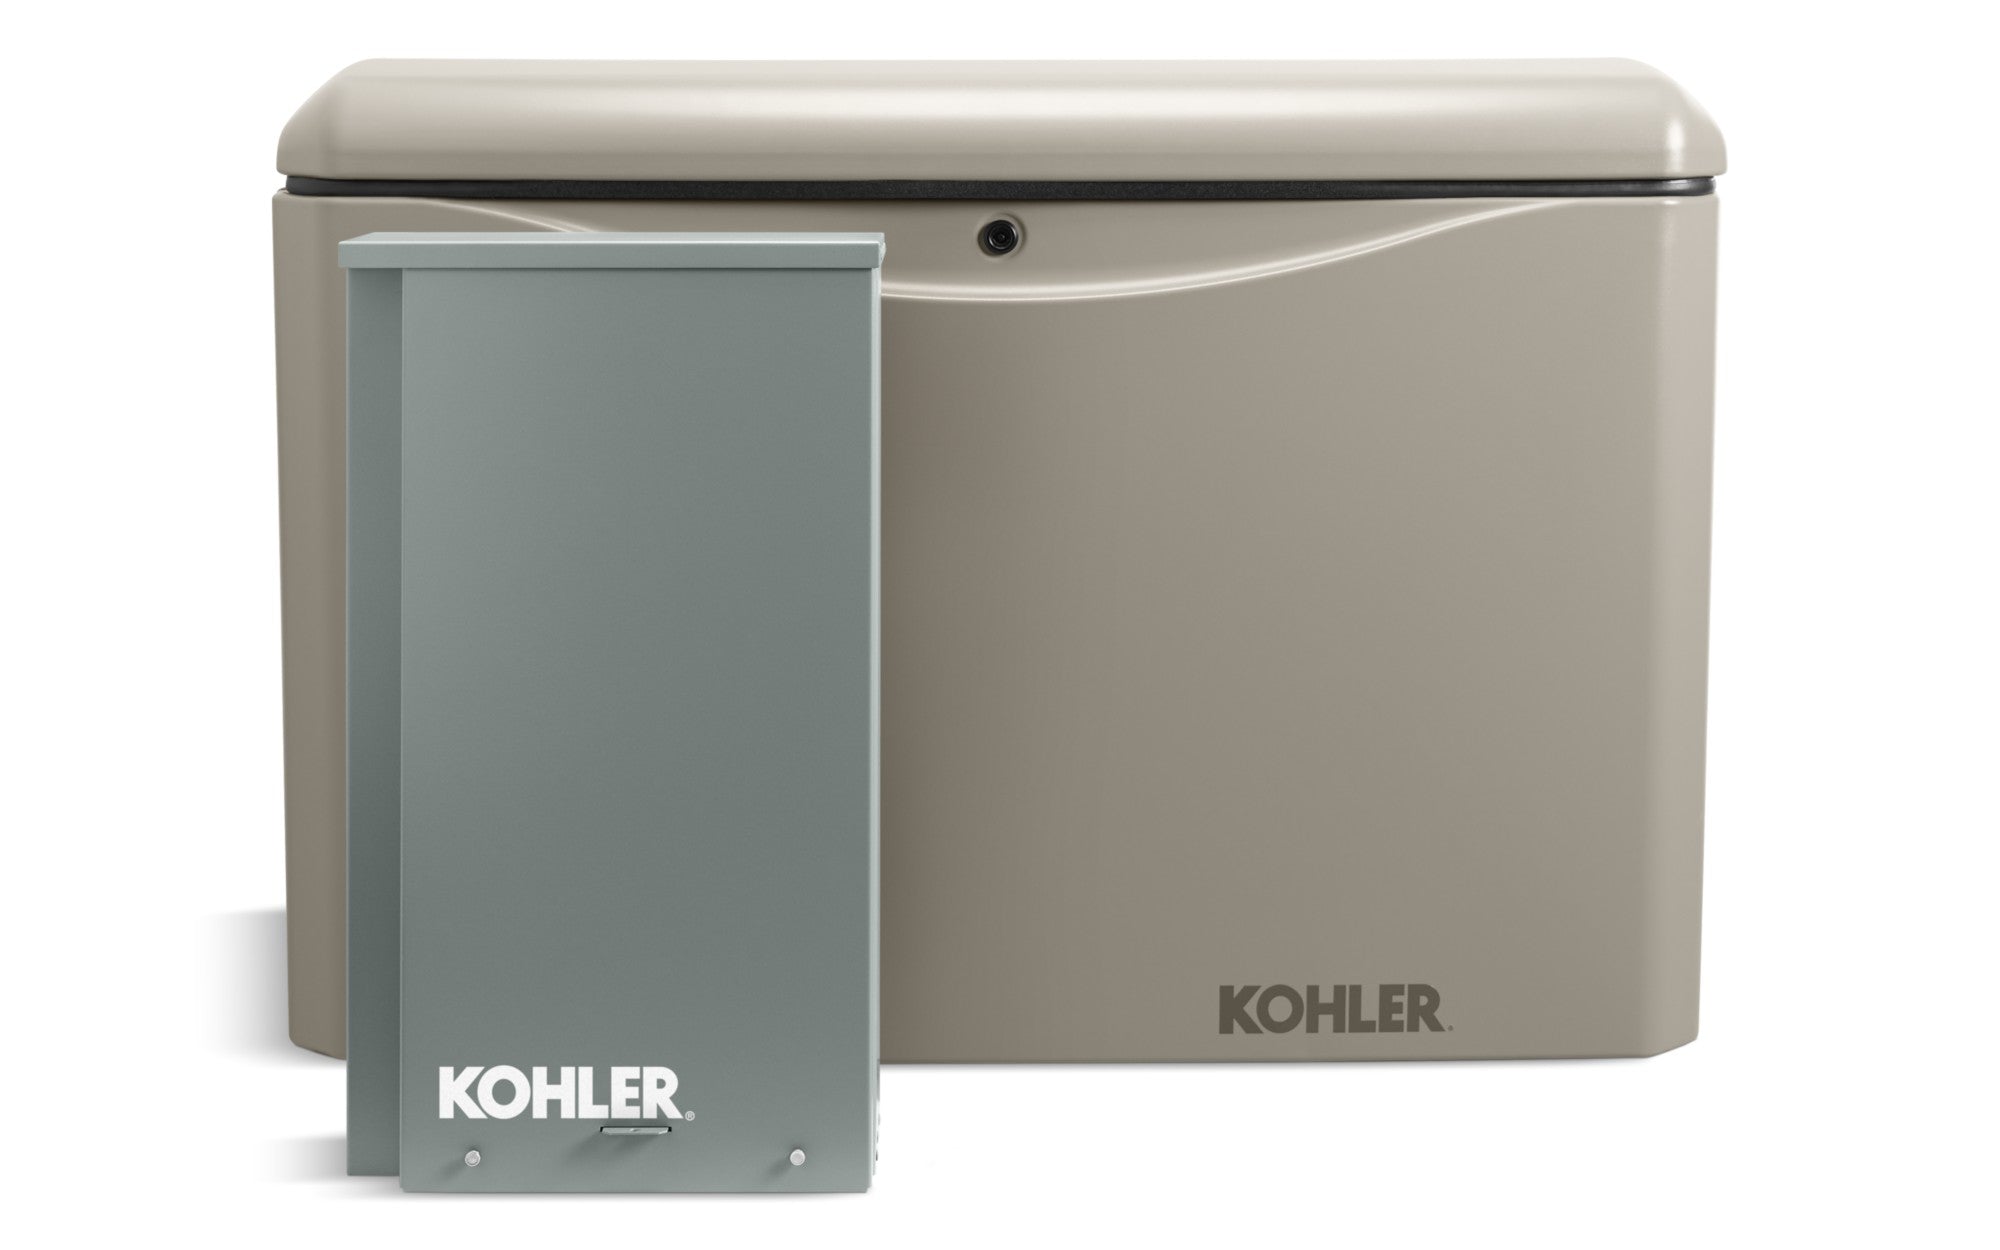 Kohler 20RCAL-200SELS Air-Cooled Standby Generator with 200 Amp Transfer Switch Single Phase, 20,000-Watt